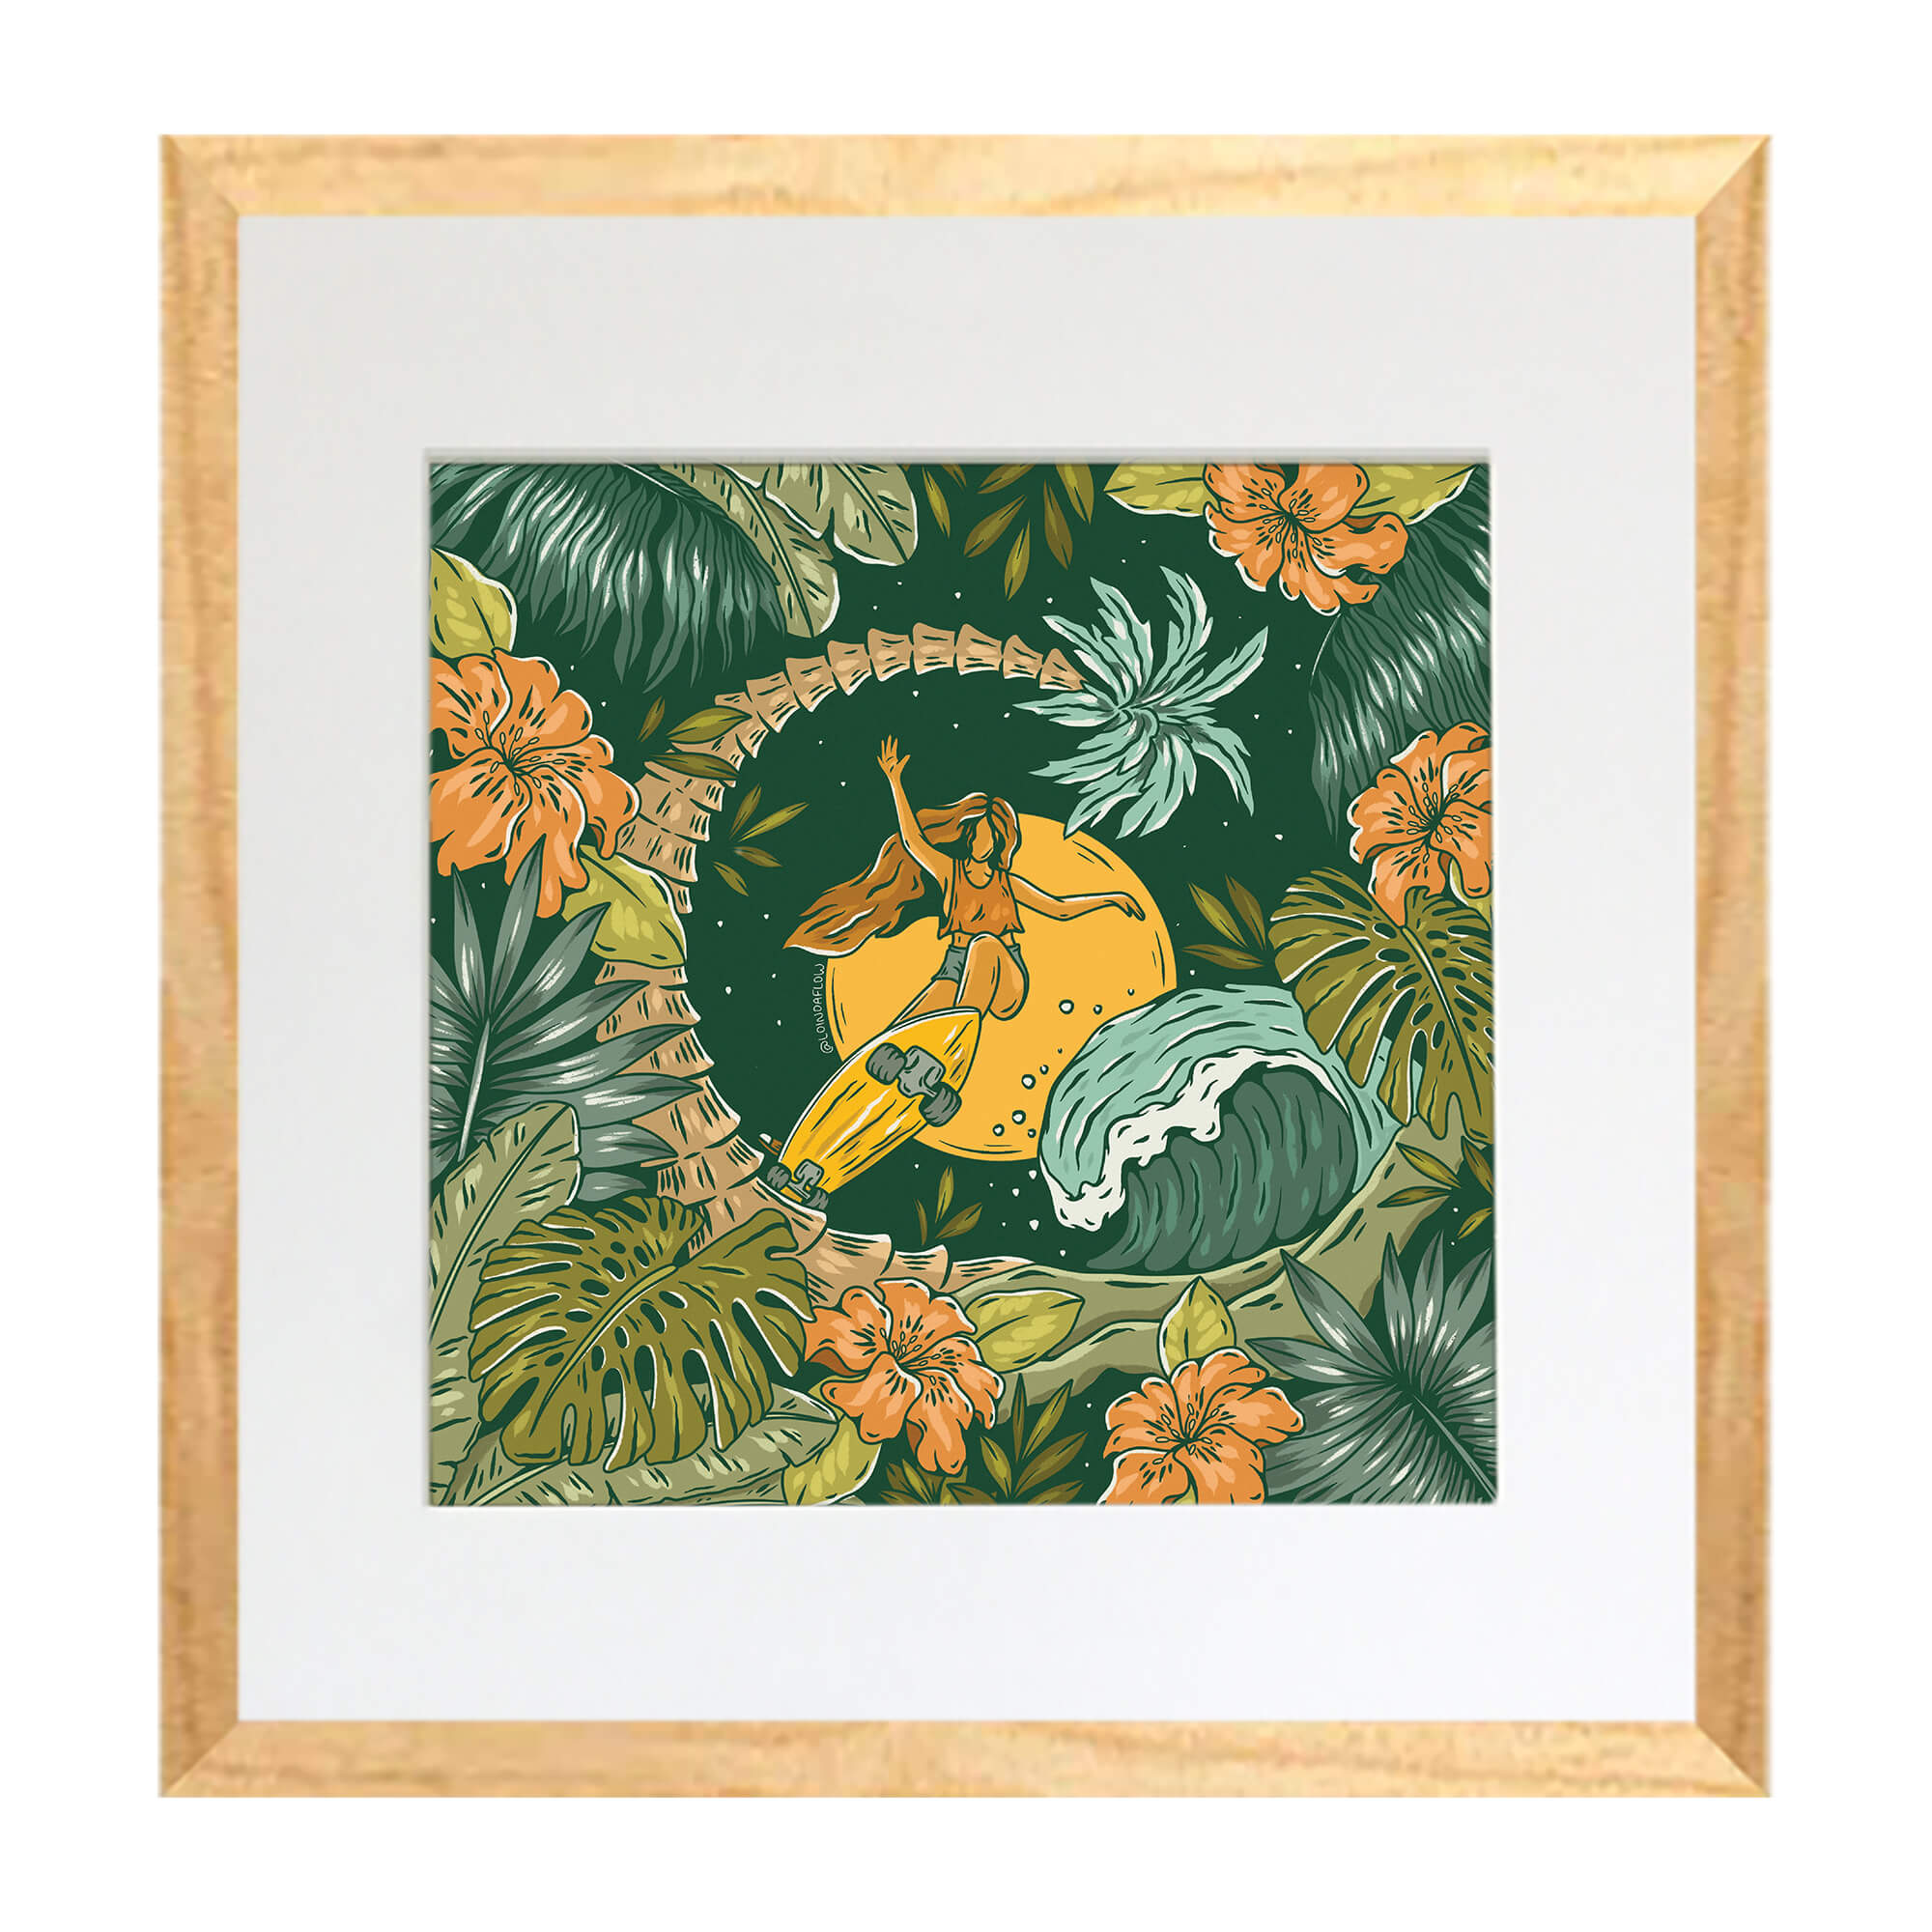 A matted art print with wood frame depicting a skater surrounded by plants  by hawaii artist Laihha Organna